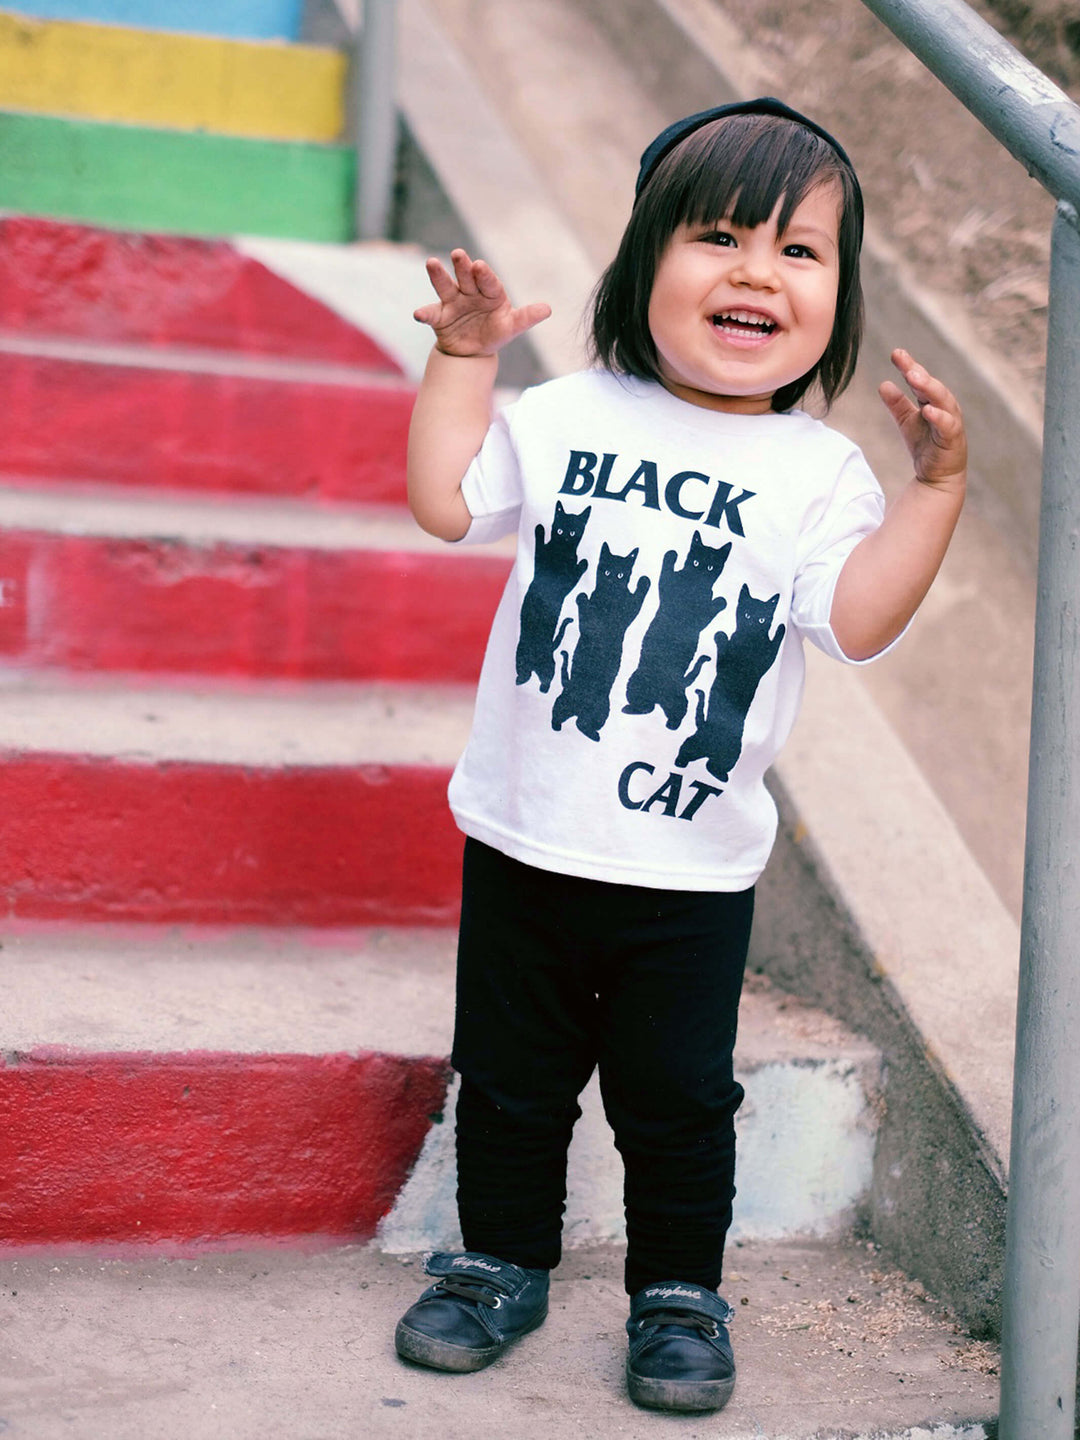 A model wearing a white kid's tee with black cats parodying Black Flag on it.